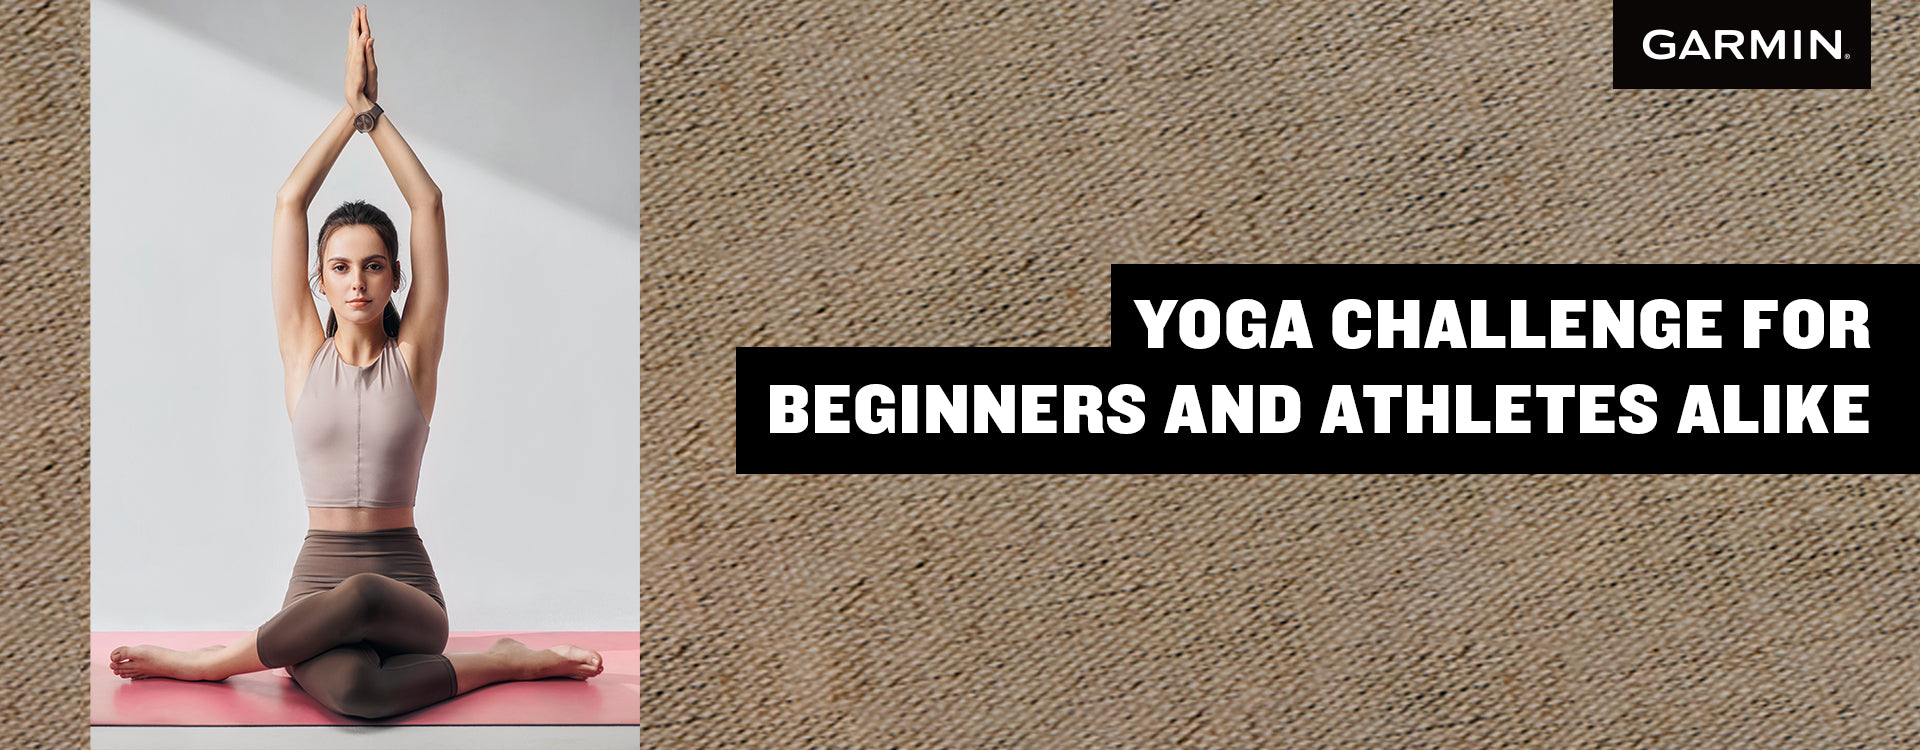 Yoga Challenge for Beginners and Athletes Alike